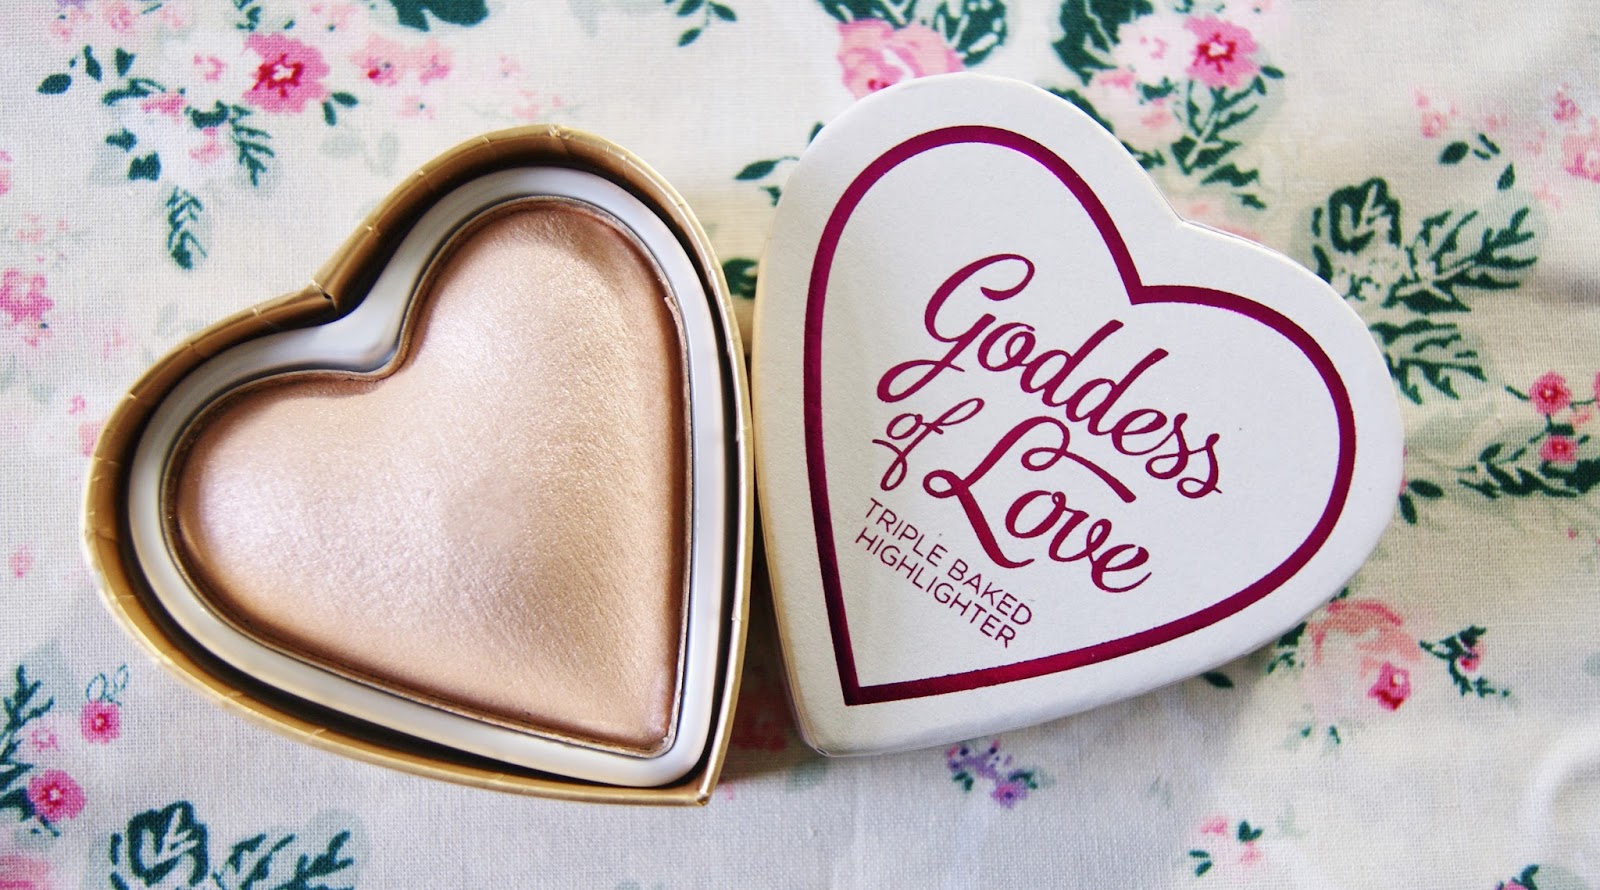 BEAUTY REVIEW: I HEART MAKEUP GODDESS OF HIGHLIGHTER - A Life With Frills